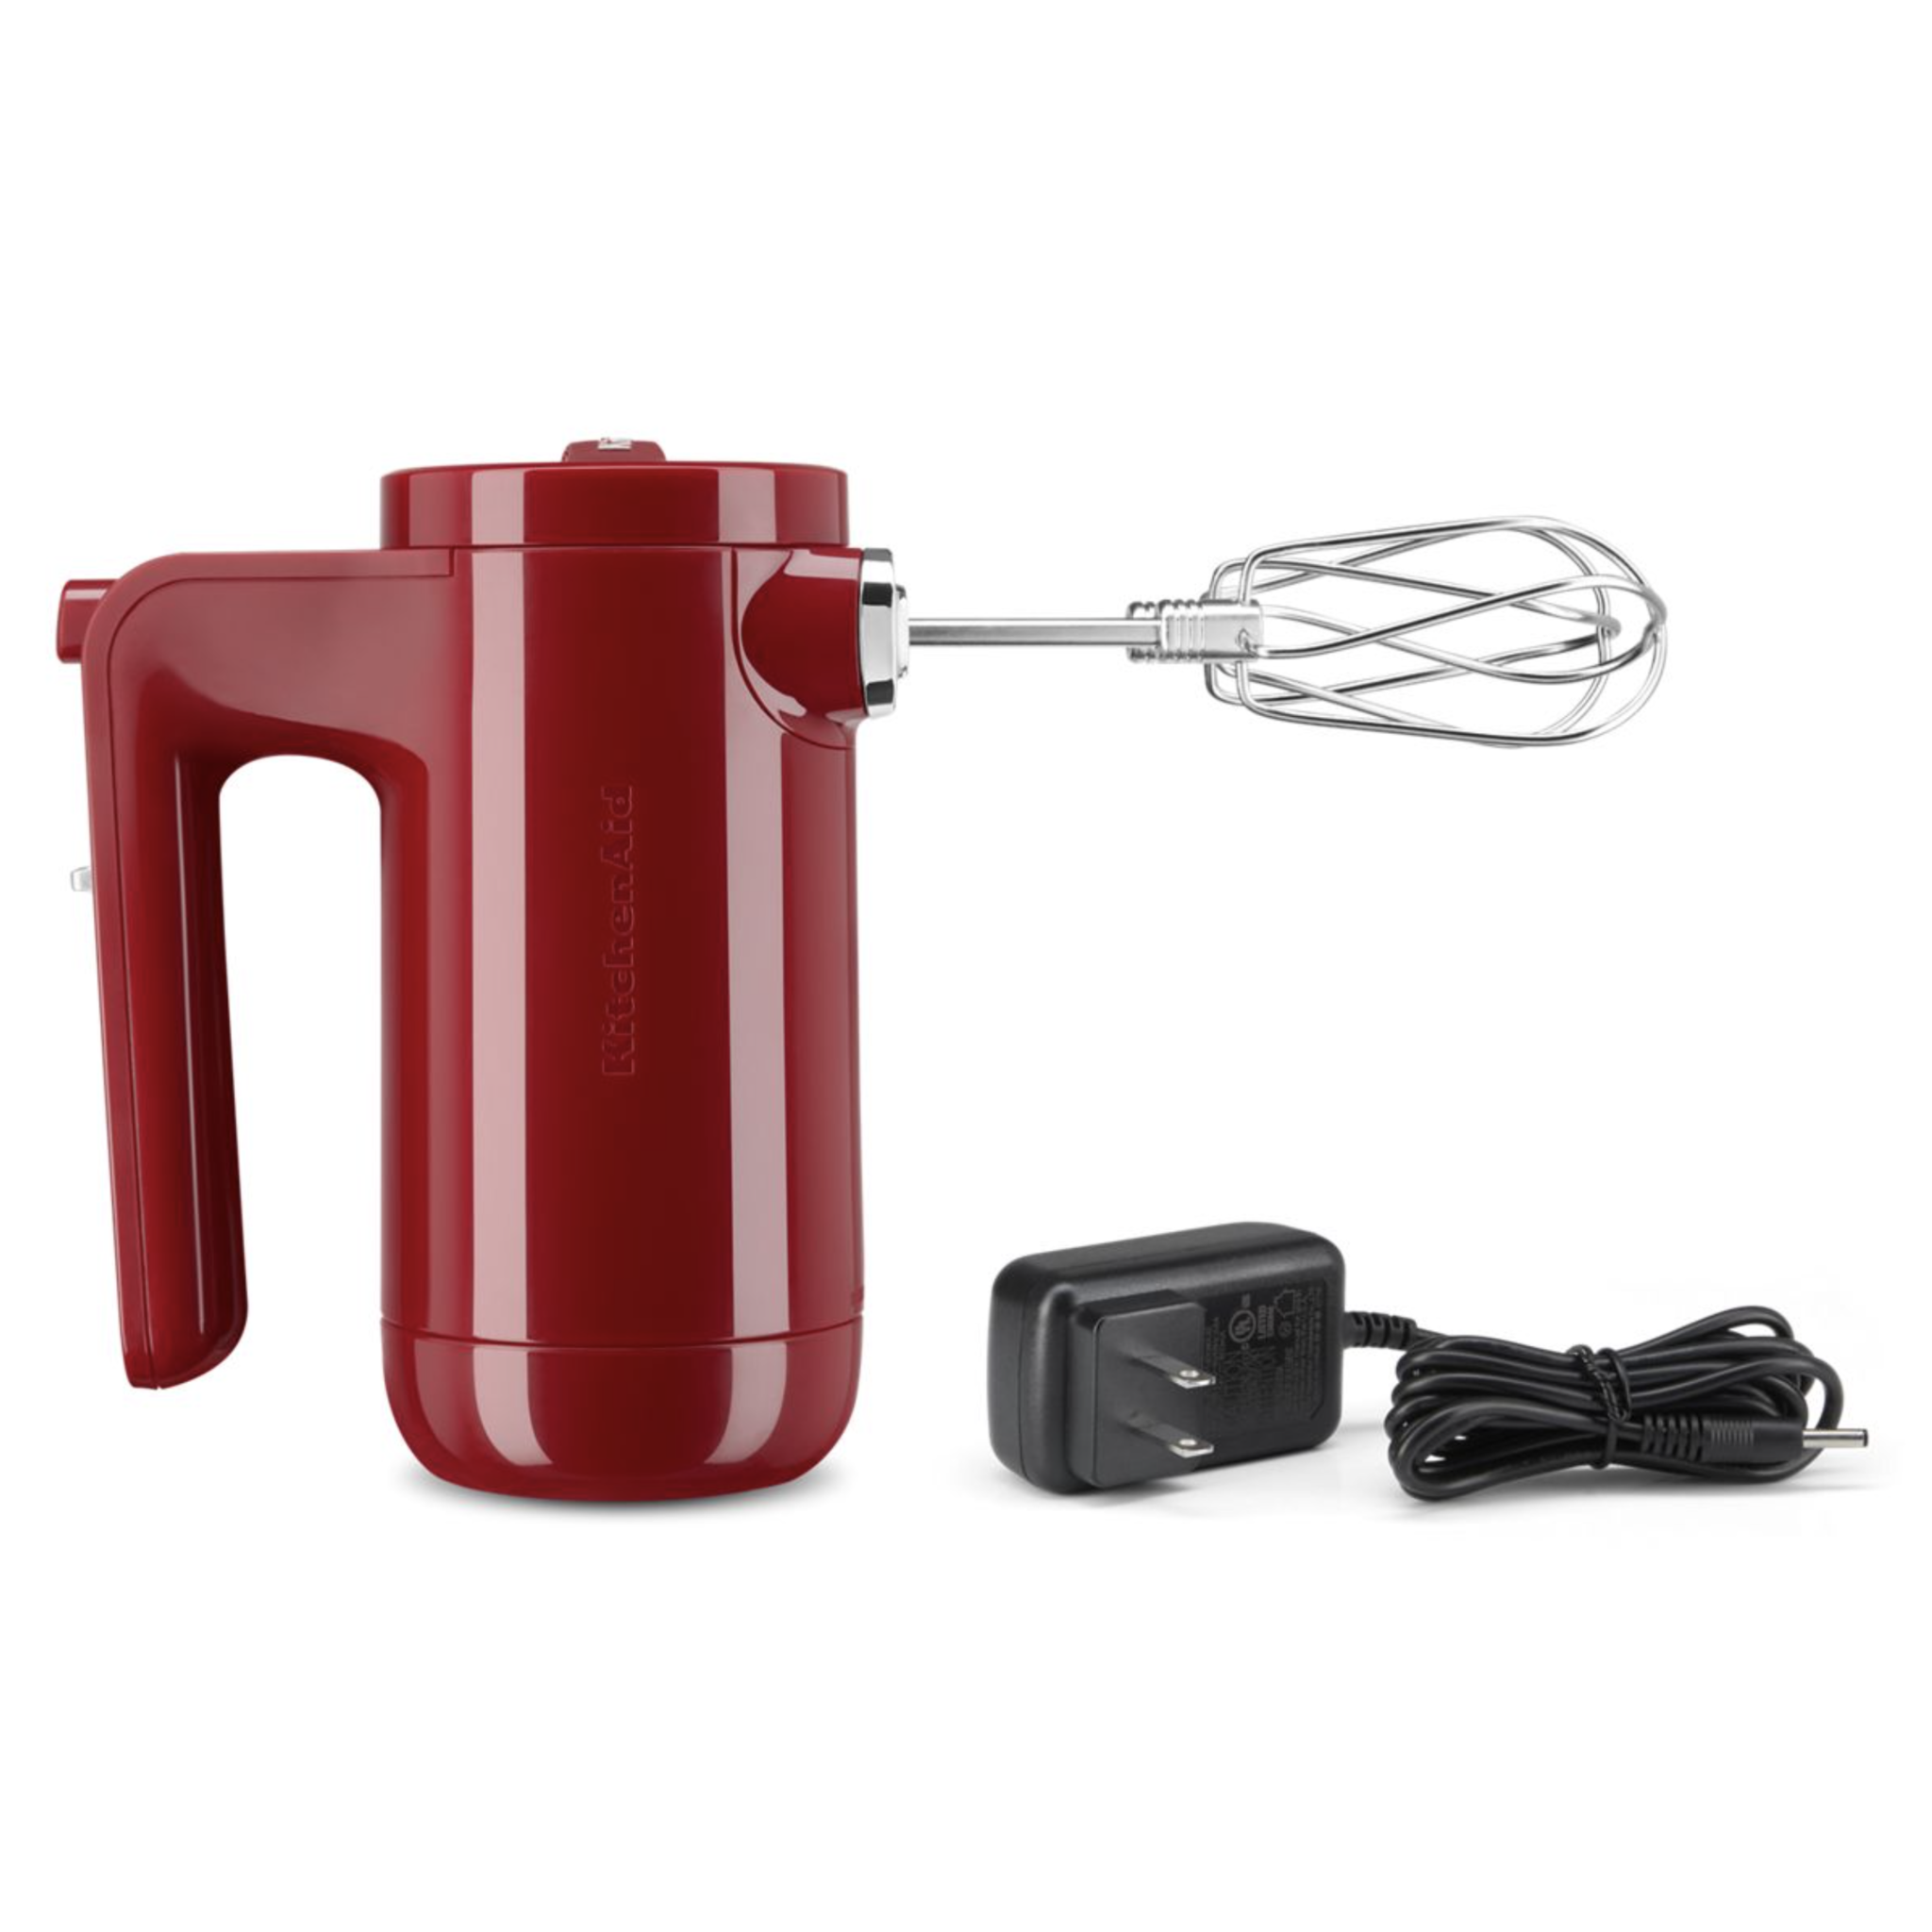 KitchenAid Cordless Variable Speed Hand Blender in Empire Red